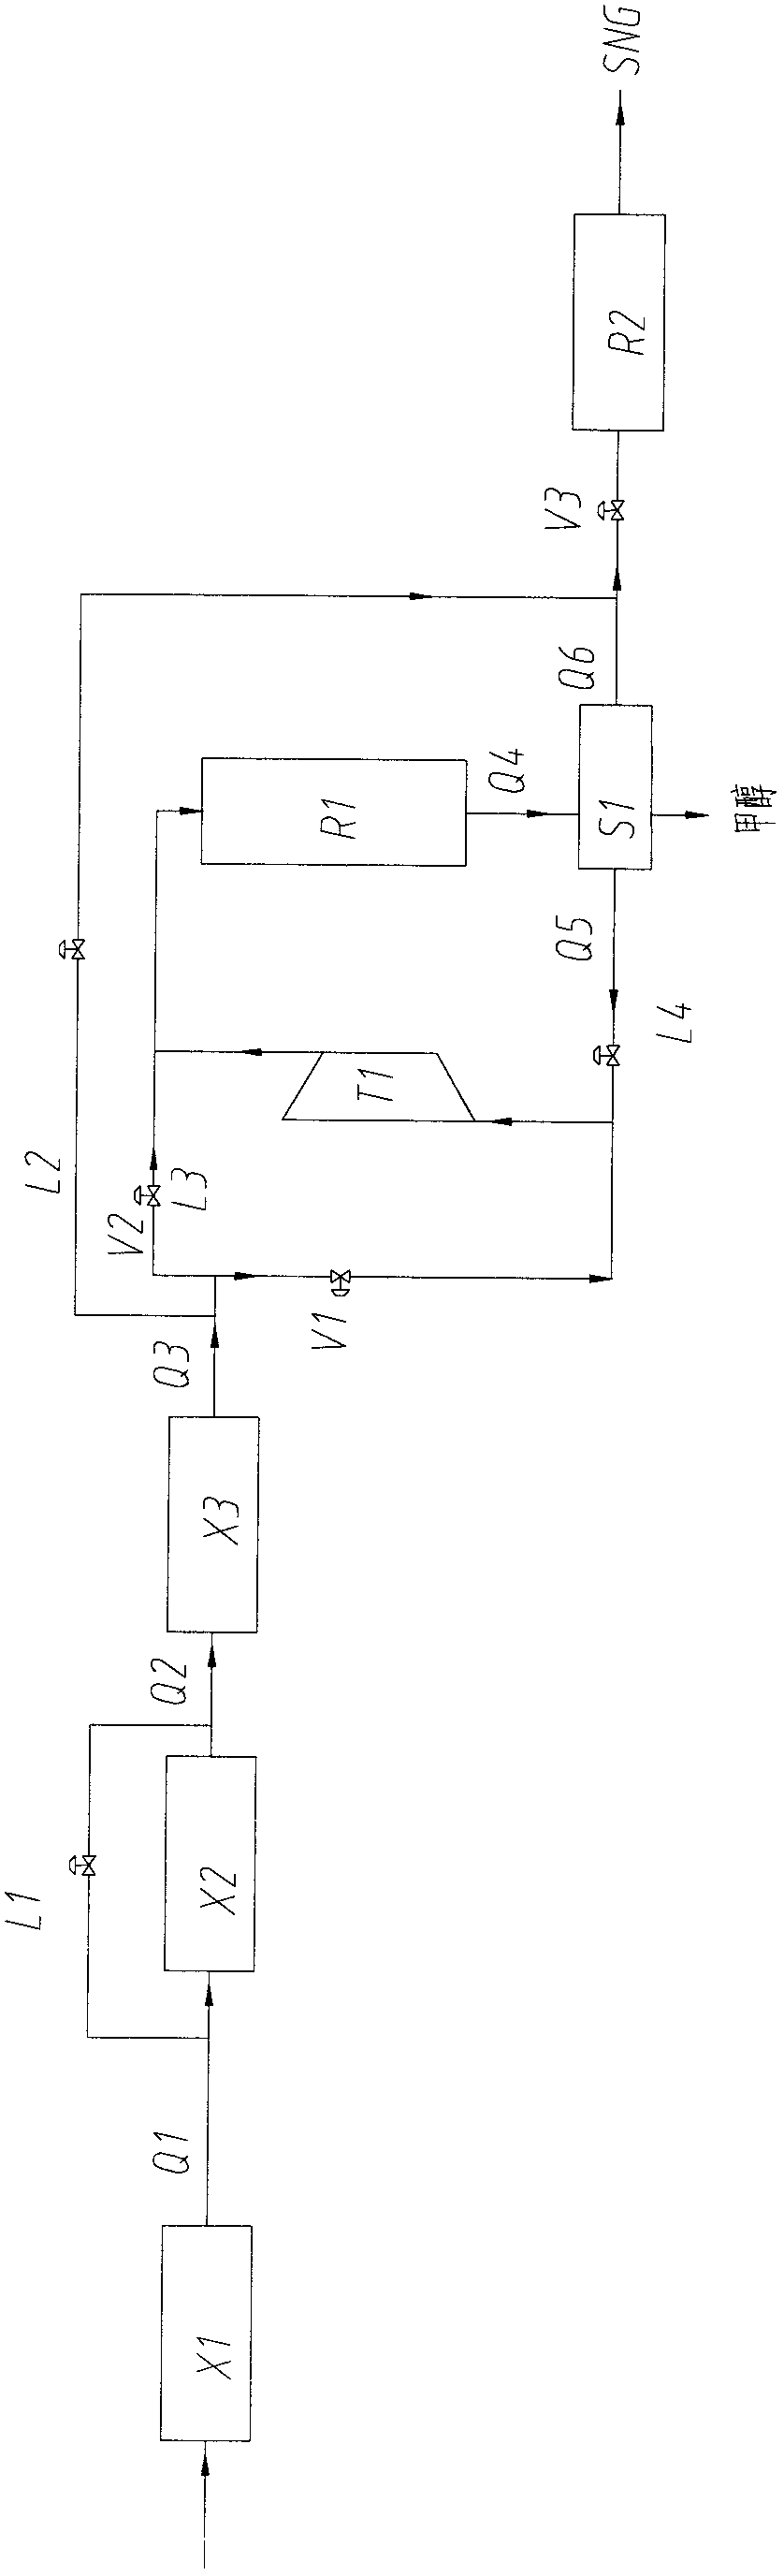 Synthesized methanol and synthesized methane co-production method and equipment